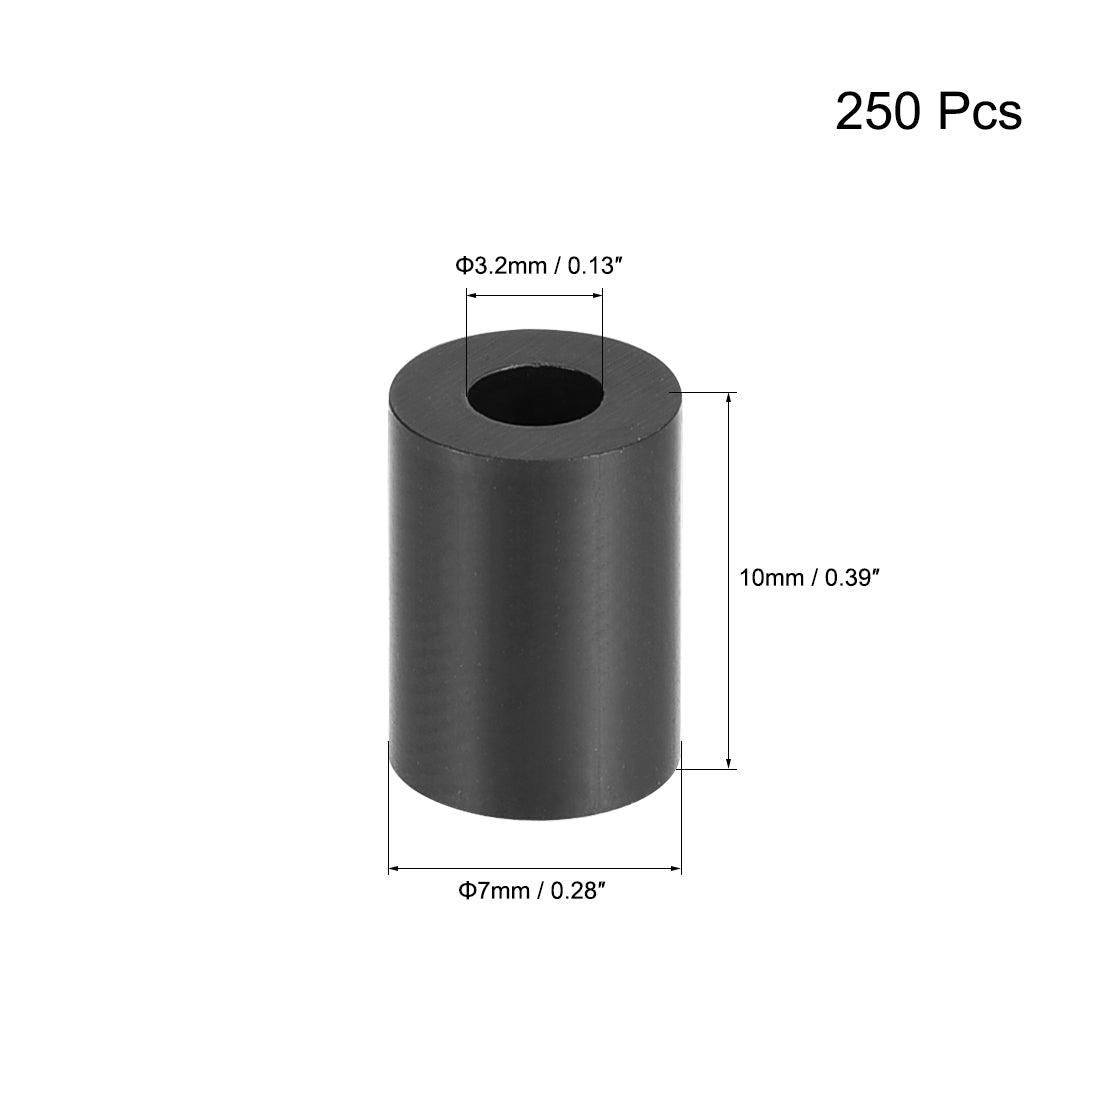 uxcell Uxcell ABS Round Spacer Washer Unthreaded Black 250Pcs, for 3D Printer TV Wall Mount Outlet Pegboard Motorbike